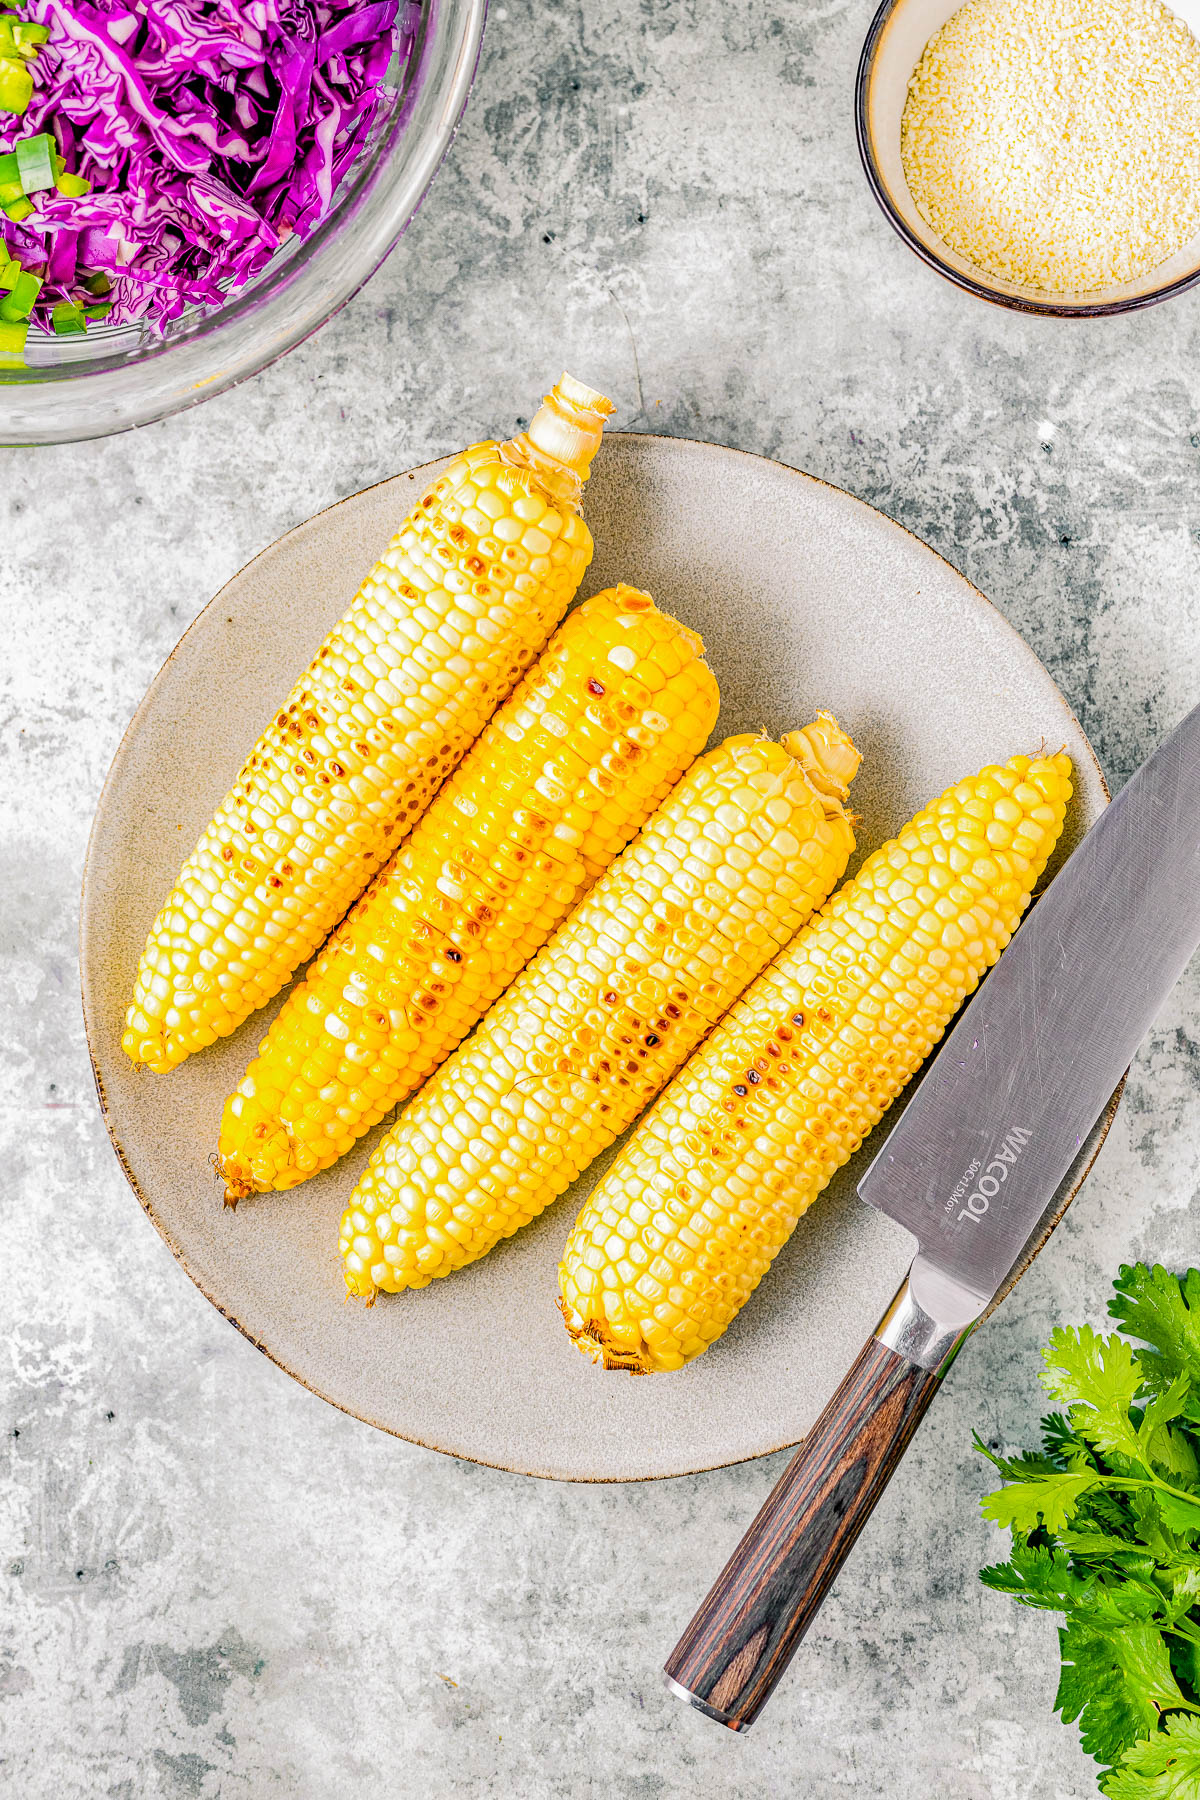 Four grilled corn cobs on a plate with a knife on the side and bowls of sesame seeds and shredded purple cabbage in the background.